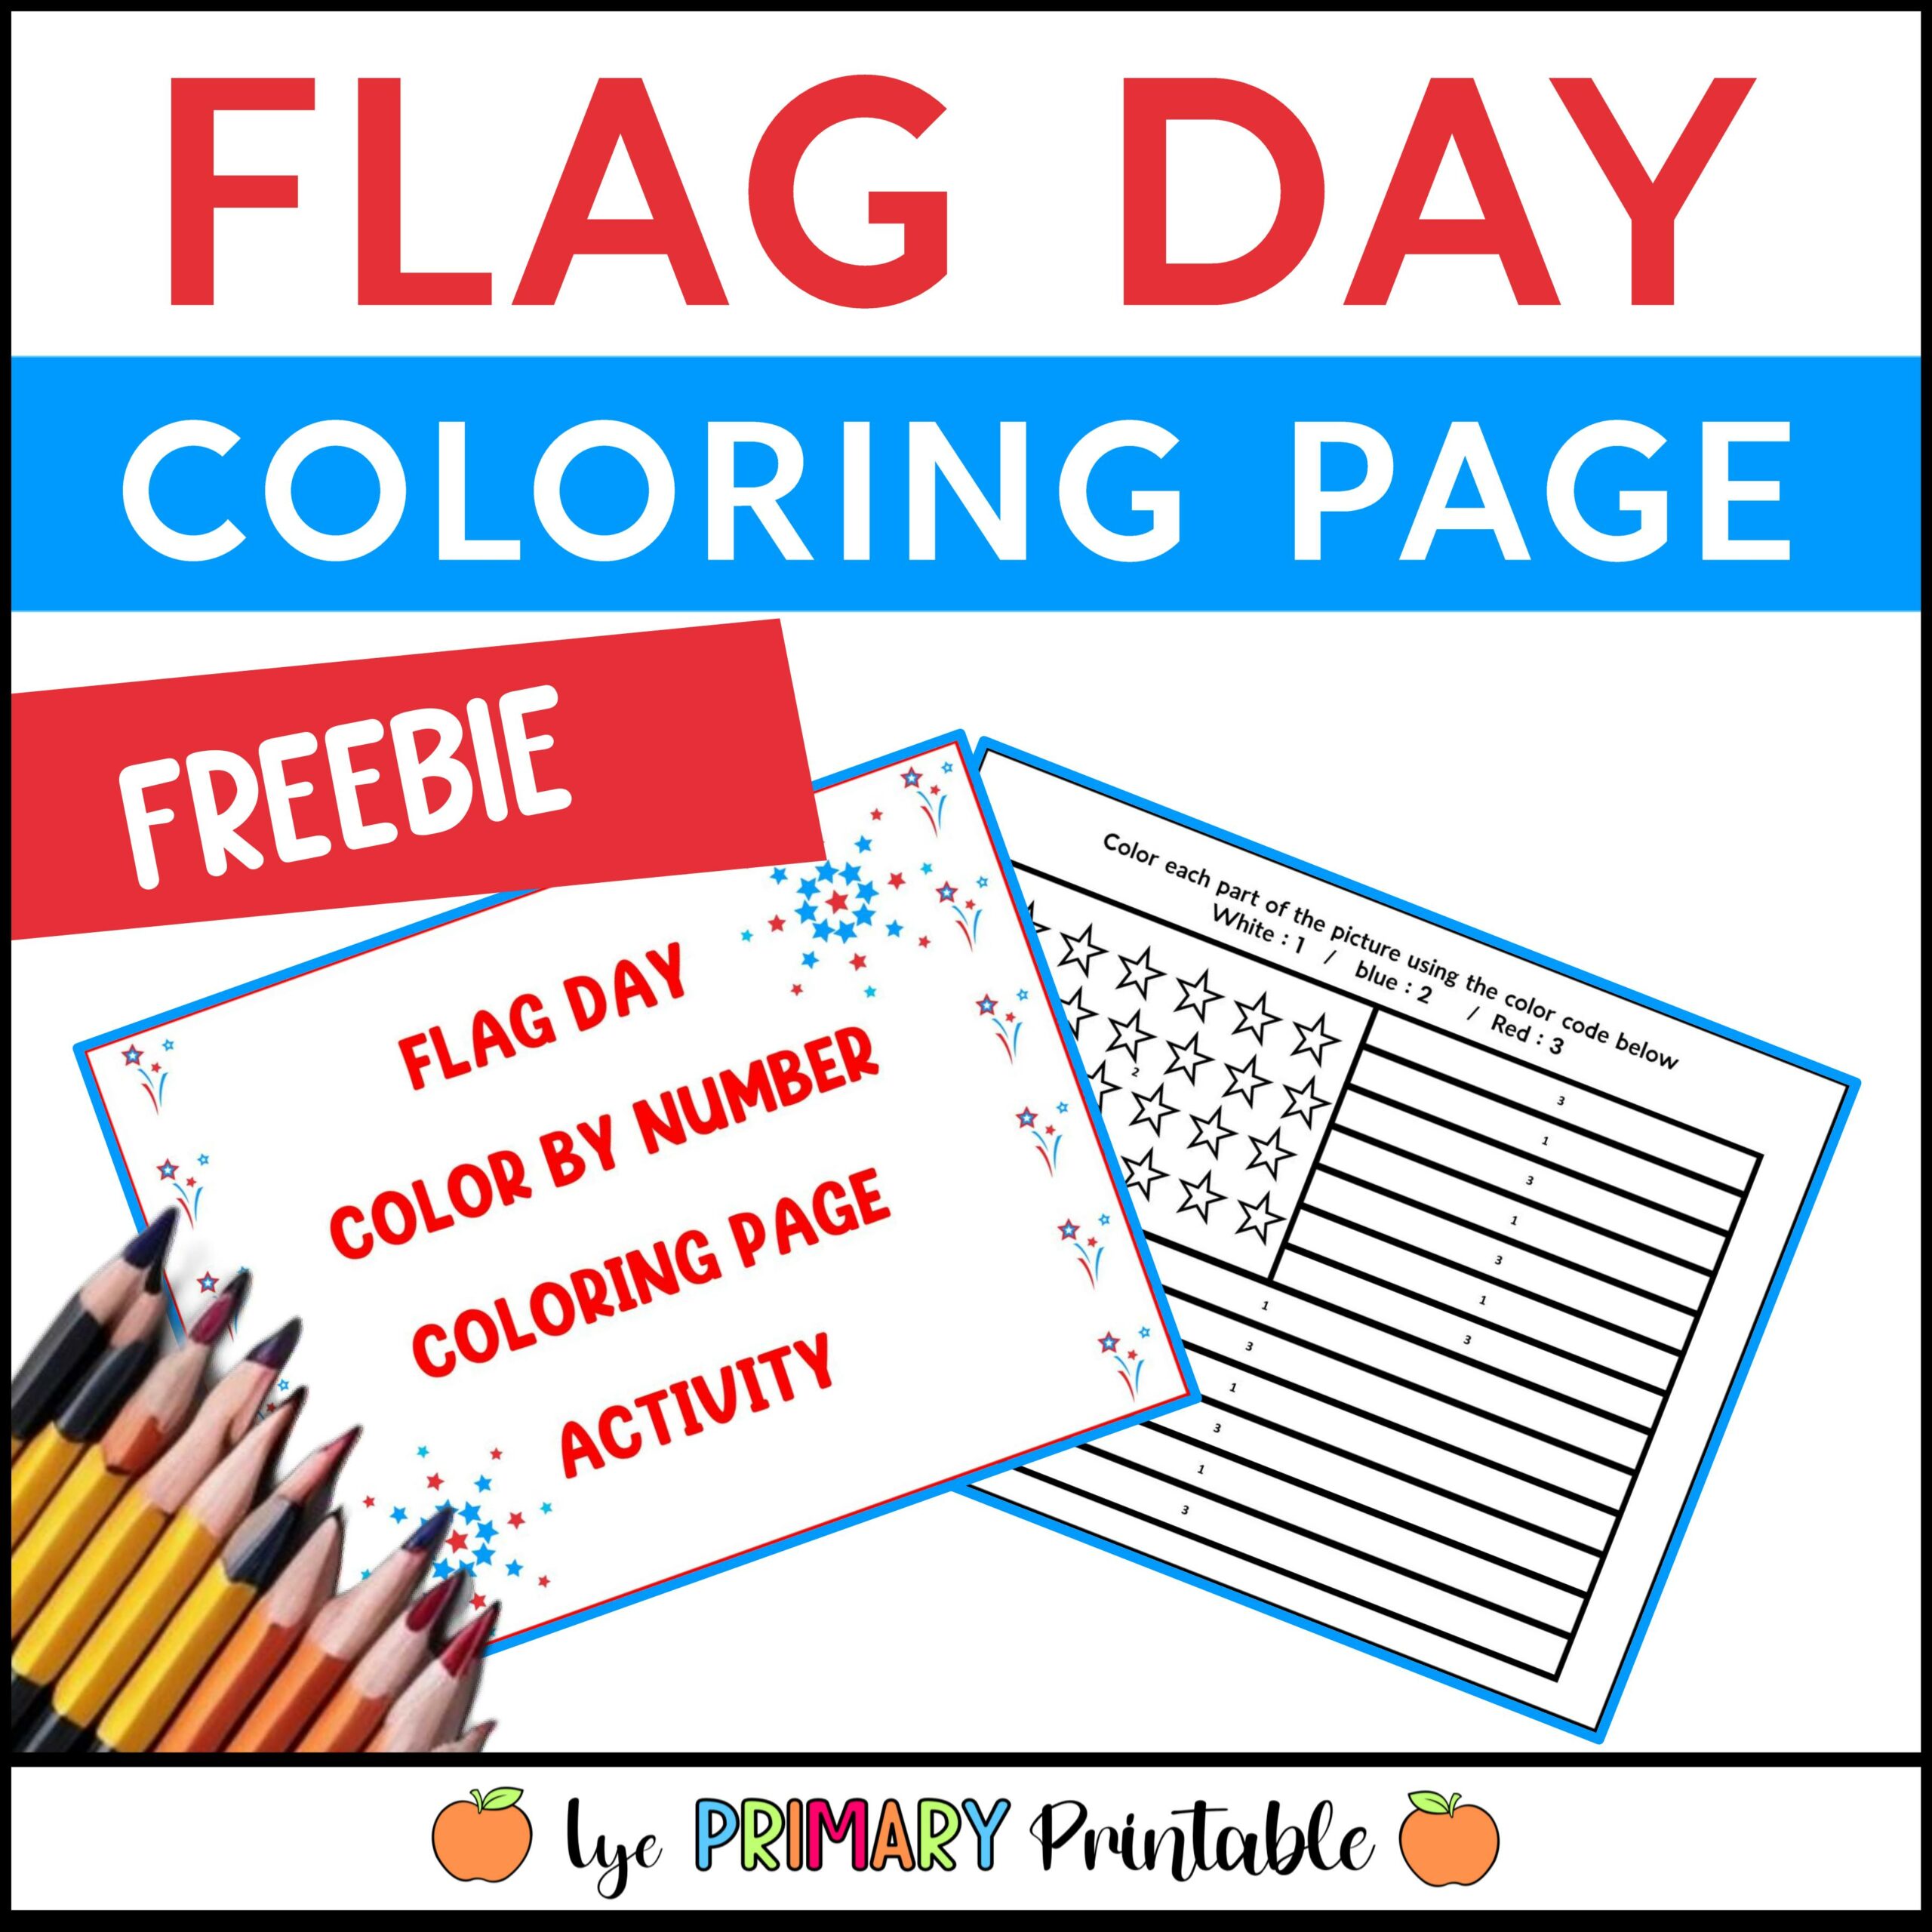 Free flag day color by number coloring page activity made by teachers